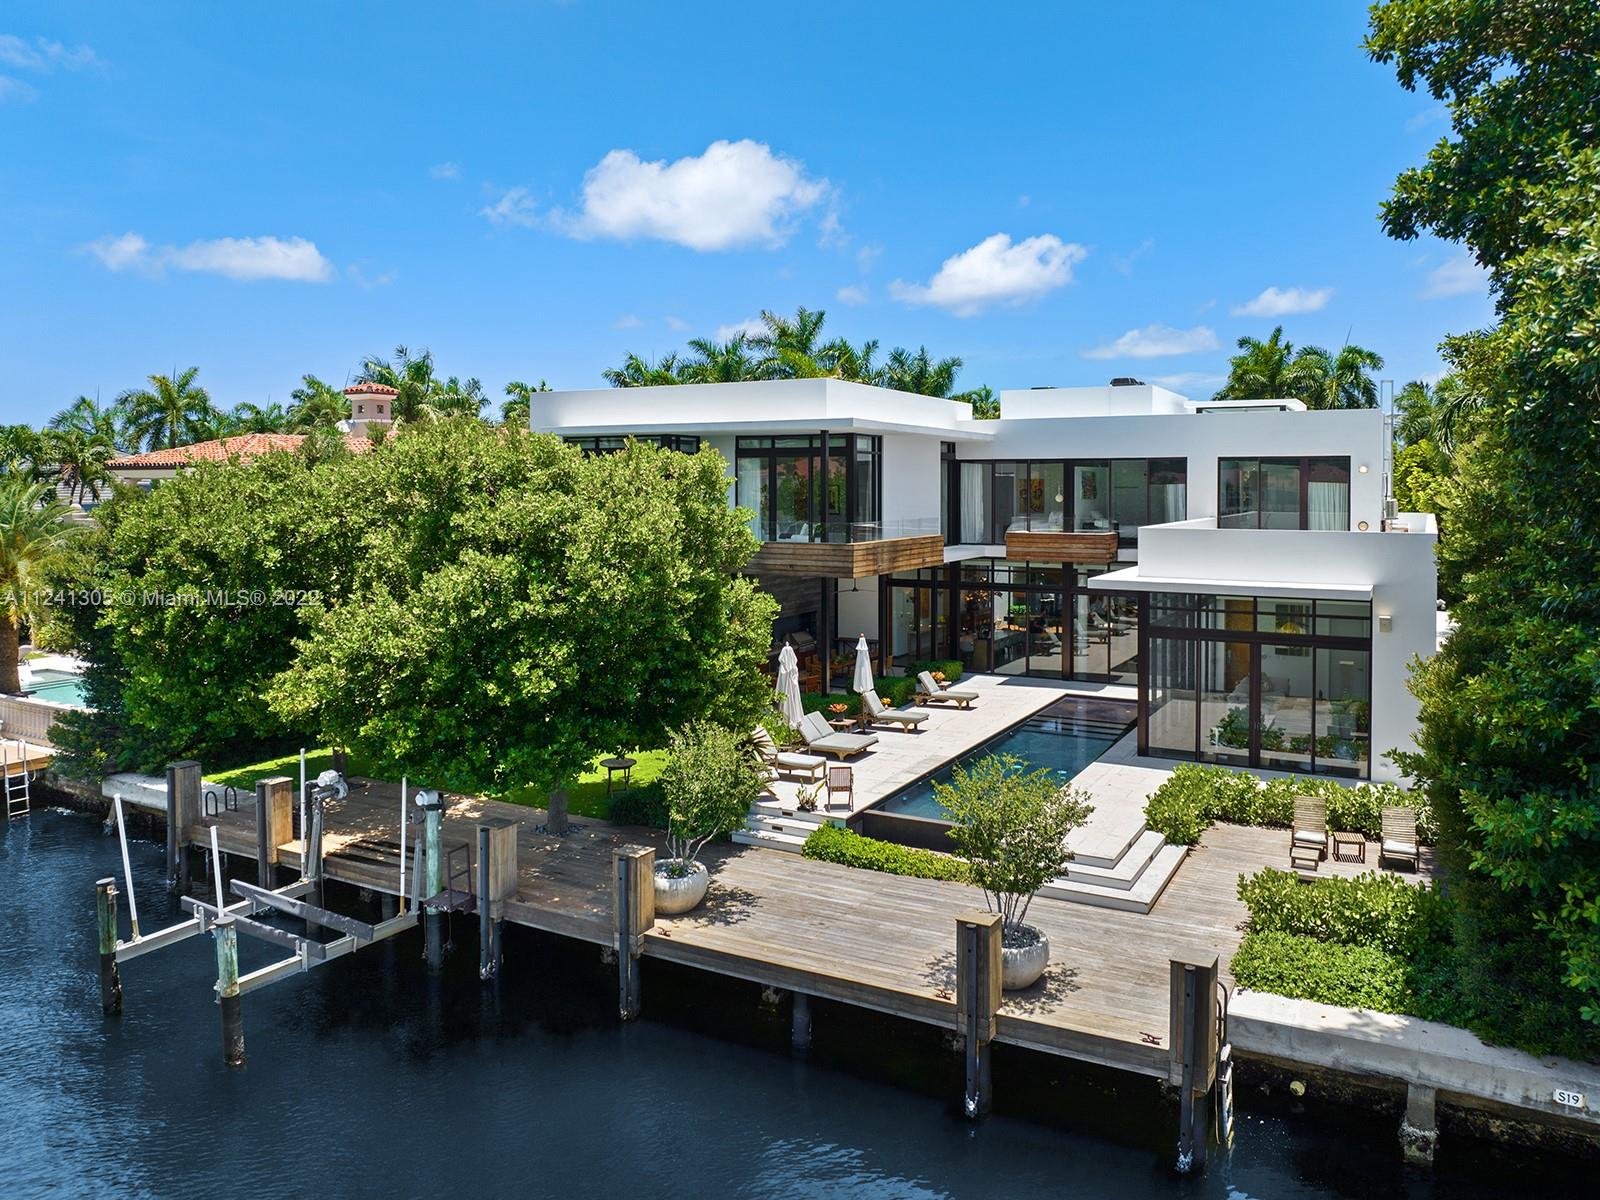 This contemporary 8,960 square foot residence is an impressive showplace on 100 linear feet of direct Intracoastal Waterway frontage within intimate Golden Beach, and a short distance from the town’s residents-only beach club. Organized around a central terrace and infinity pool, the home offers spectacular views and a refreshing feeling of openness throughout while ensuring privacy and safety. Expansive modernist interiors, including the home theater, chef’s kitchen, and lavish master suite, were given a refined minimalist aesthetic by Deborah Wecselman Design. Outside, lush subtropical landscaping creates delightful outdoor living spaces, including a secluded whirlpool deck, a waterfront lawn, and a dining terrace with a summer kitchen.